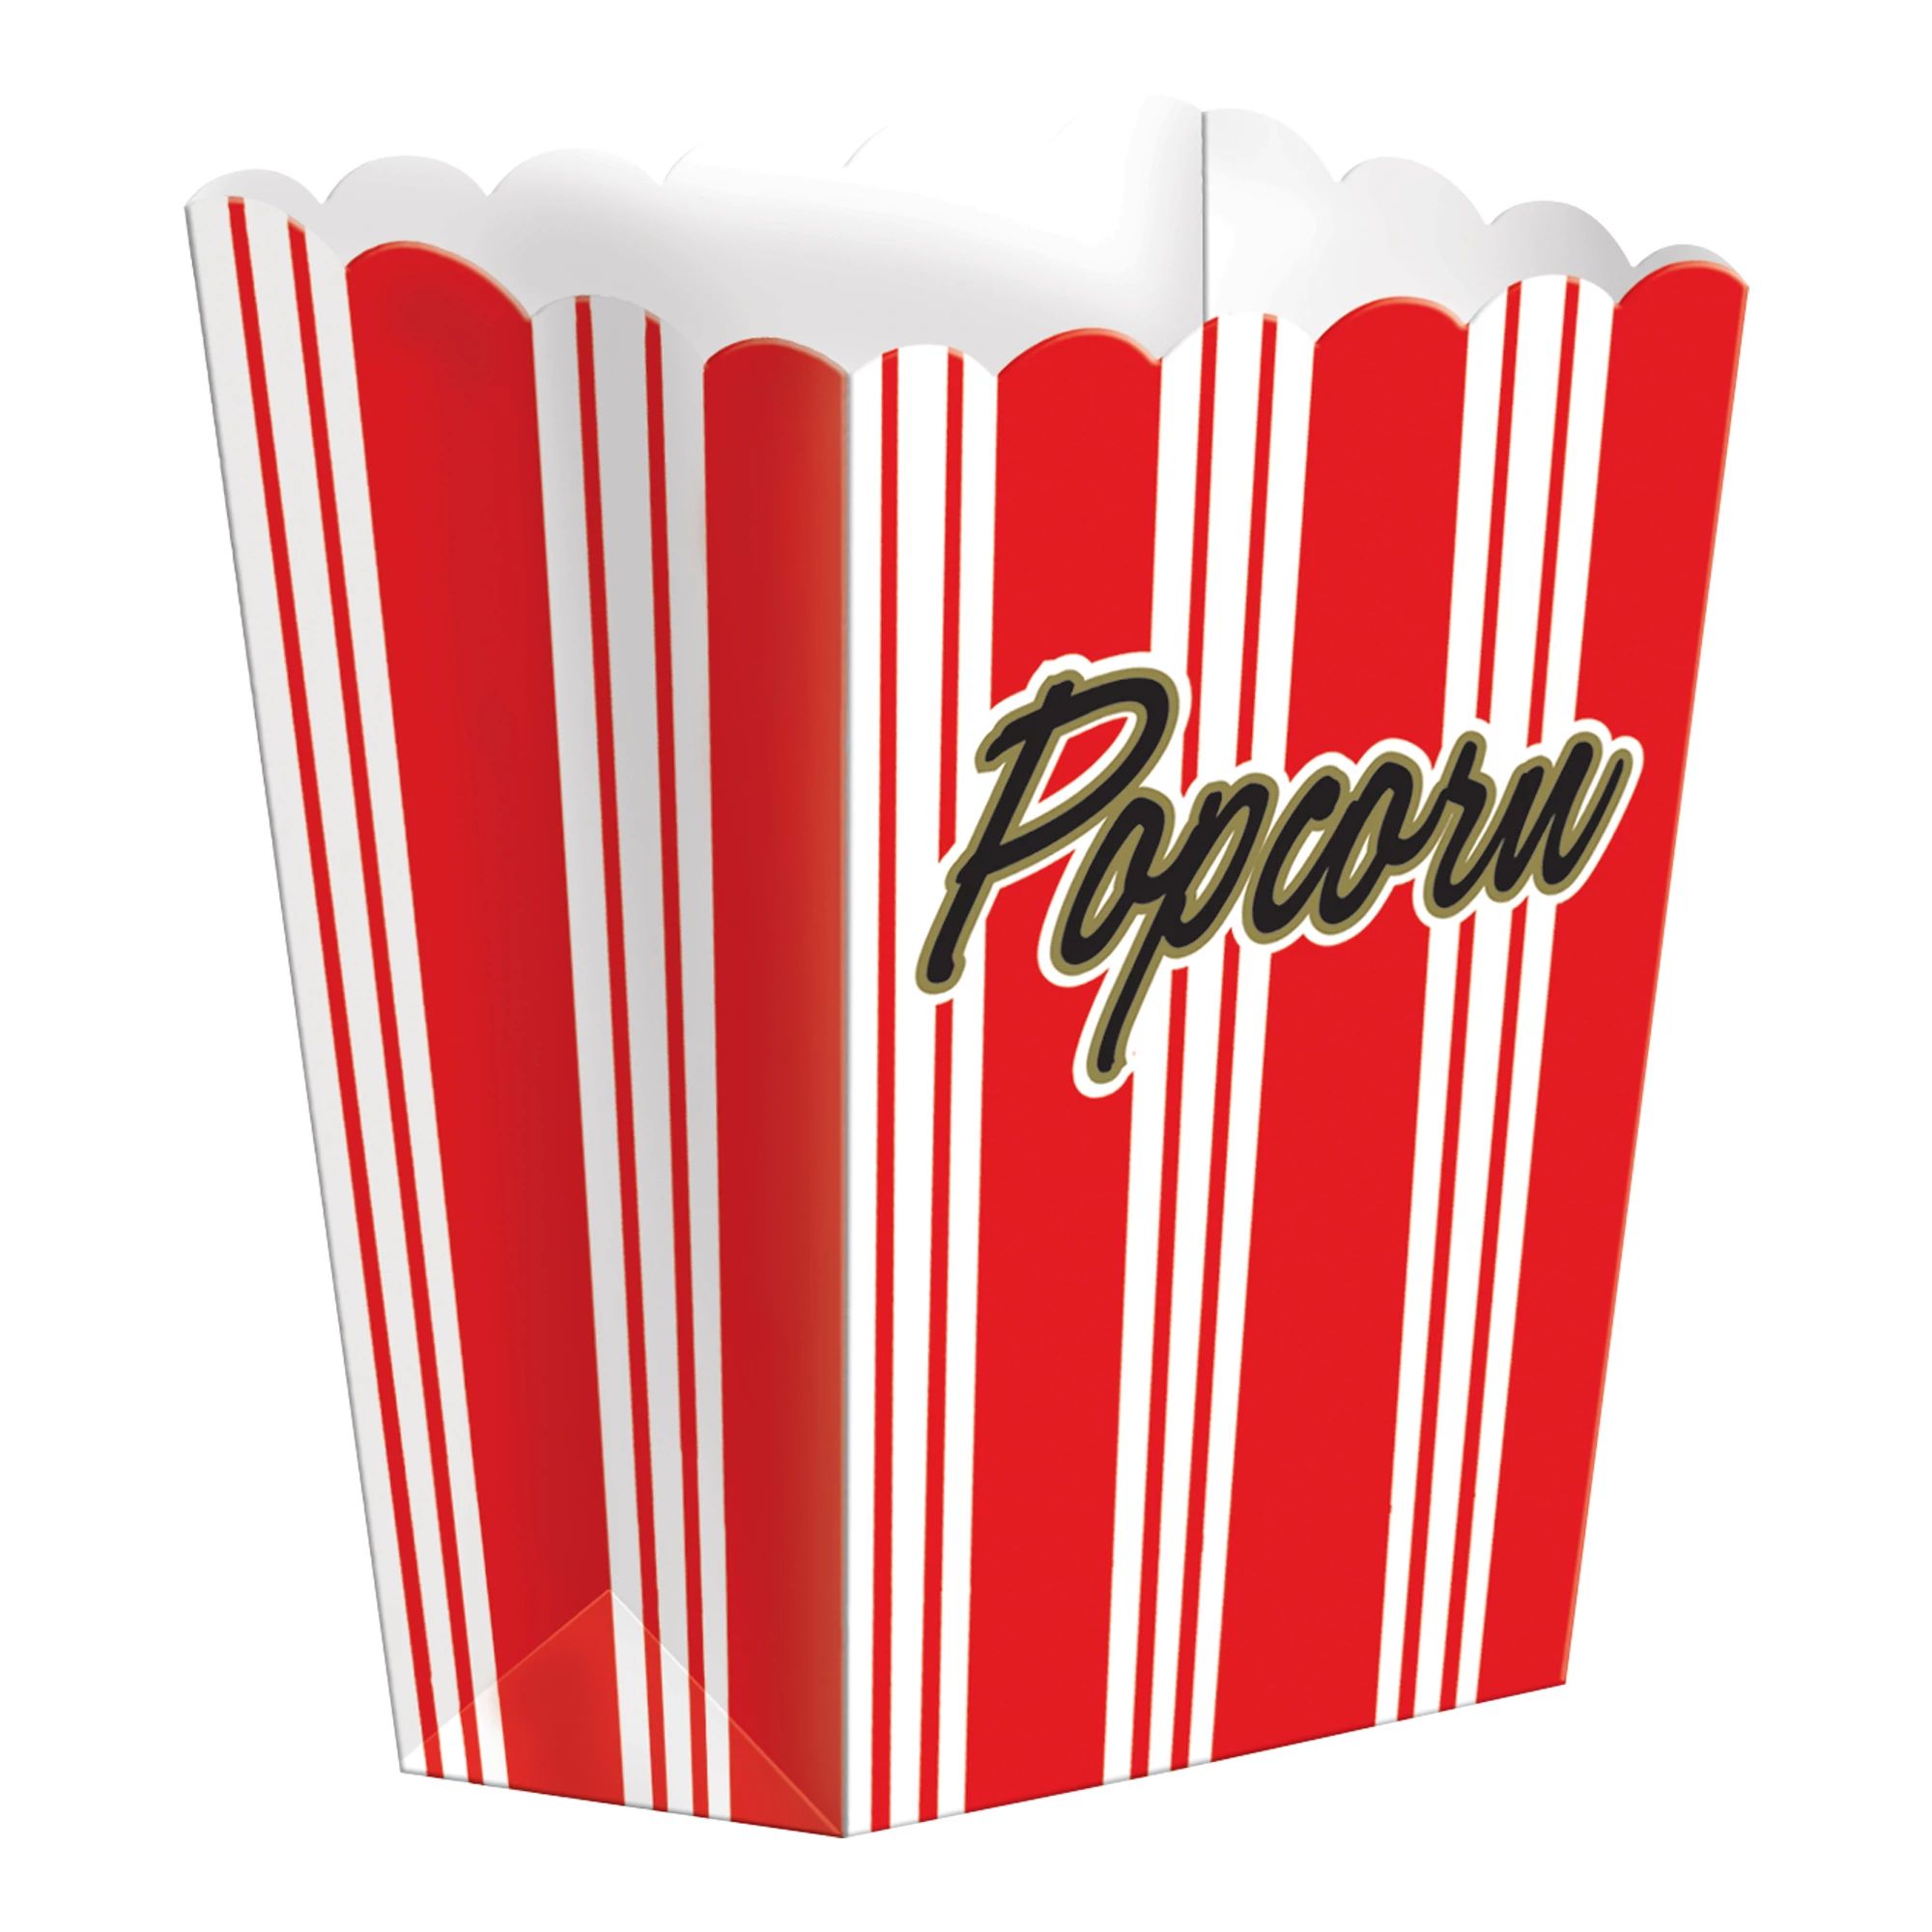 Amscan CONCESSIONS Large Popcorn Shaped Favor Box - Apple Red